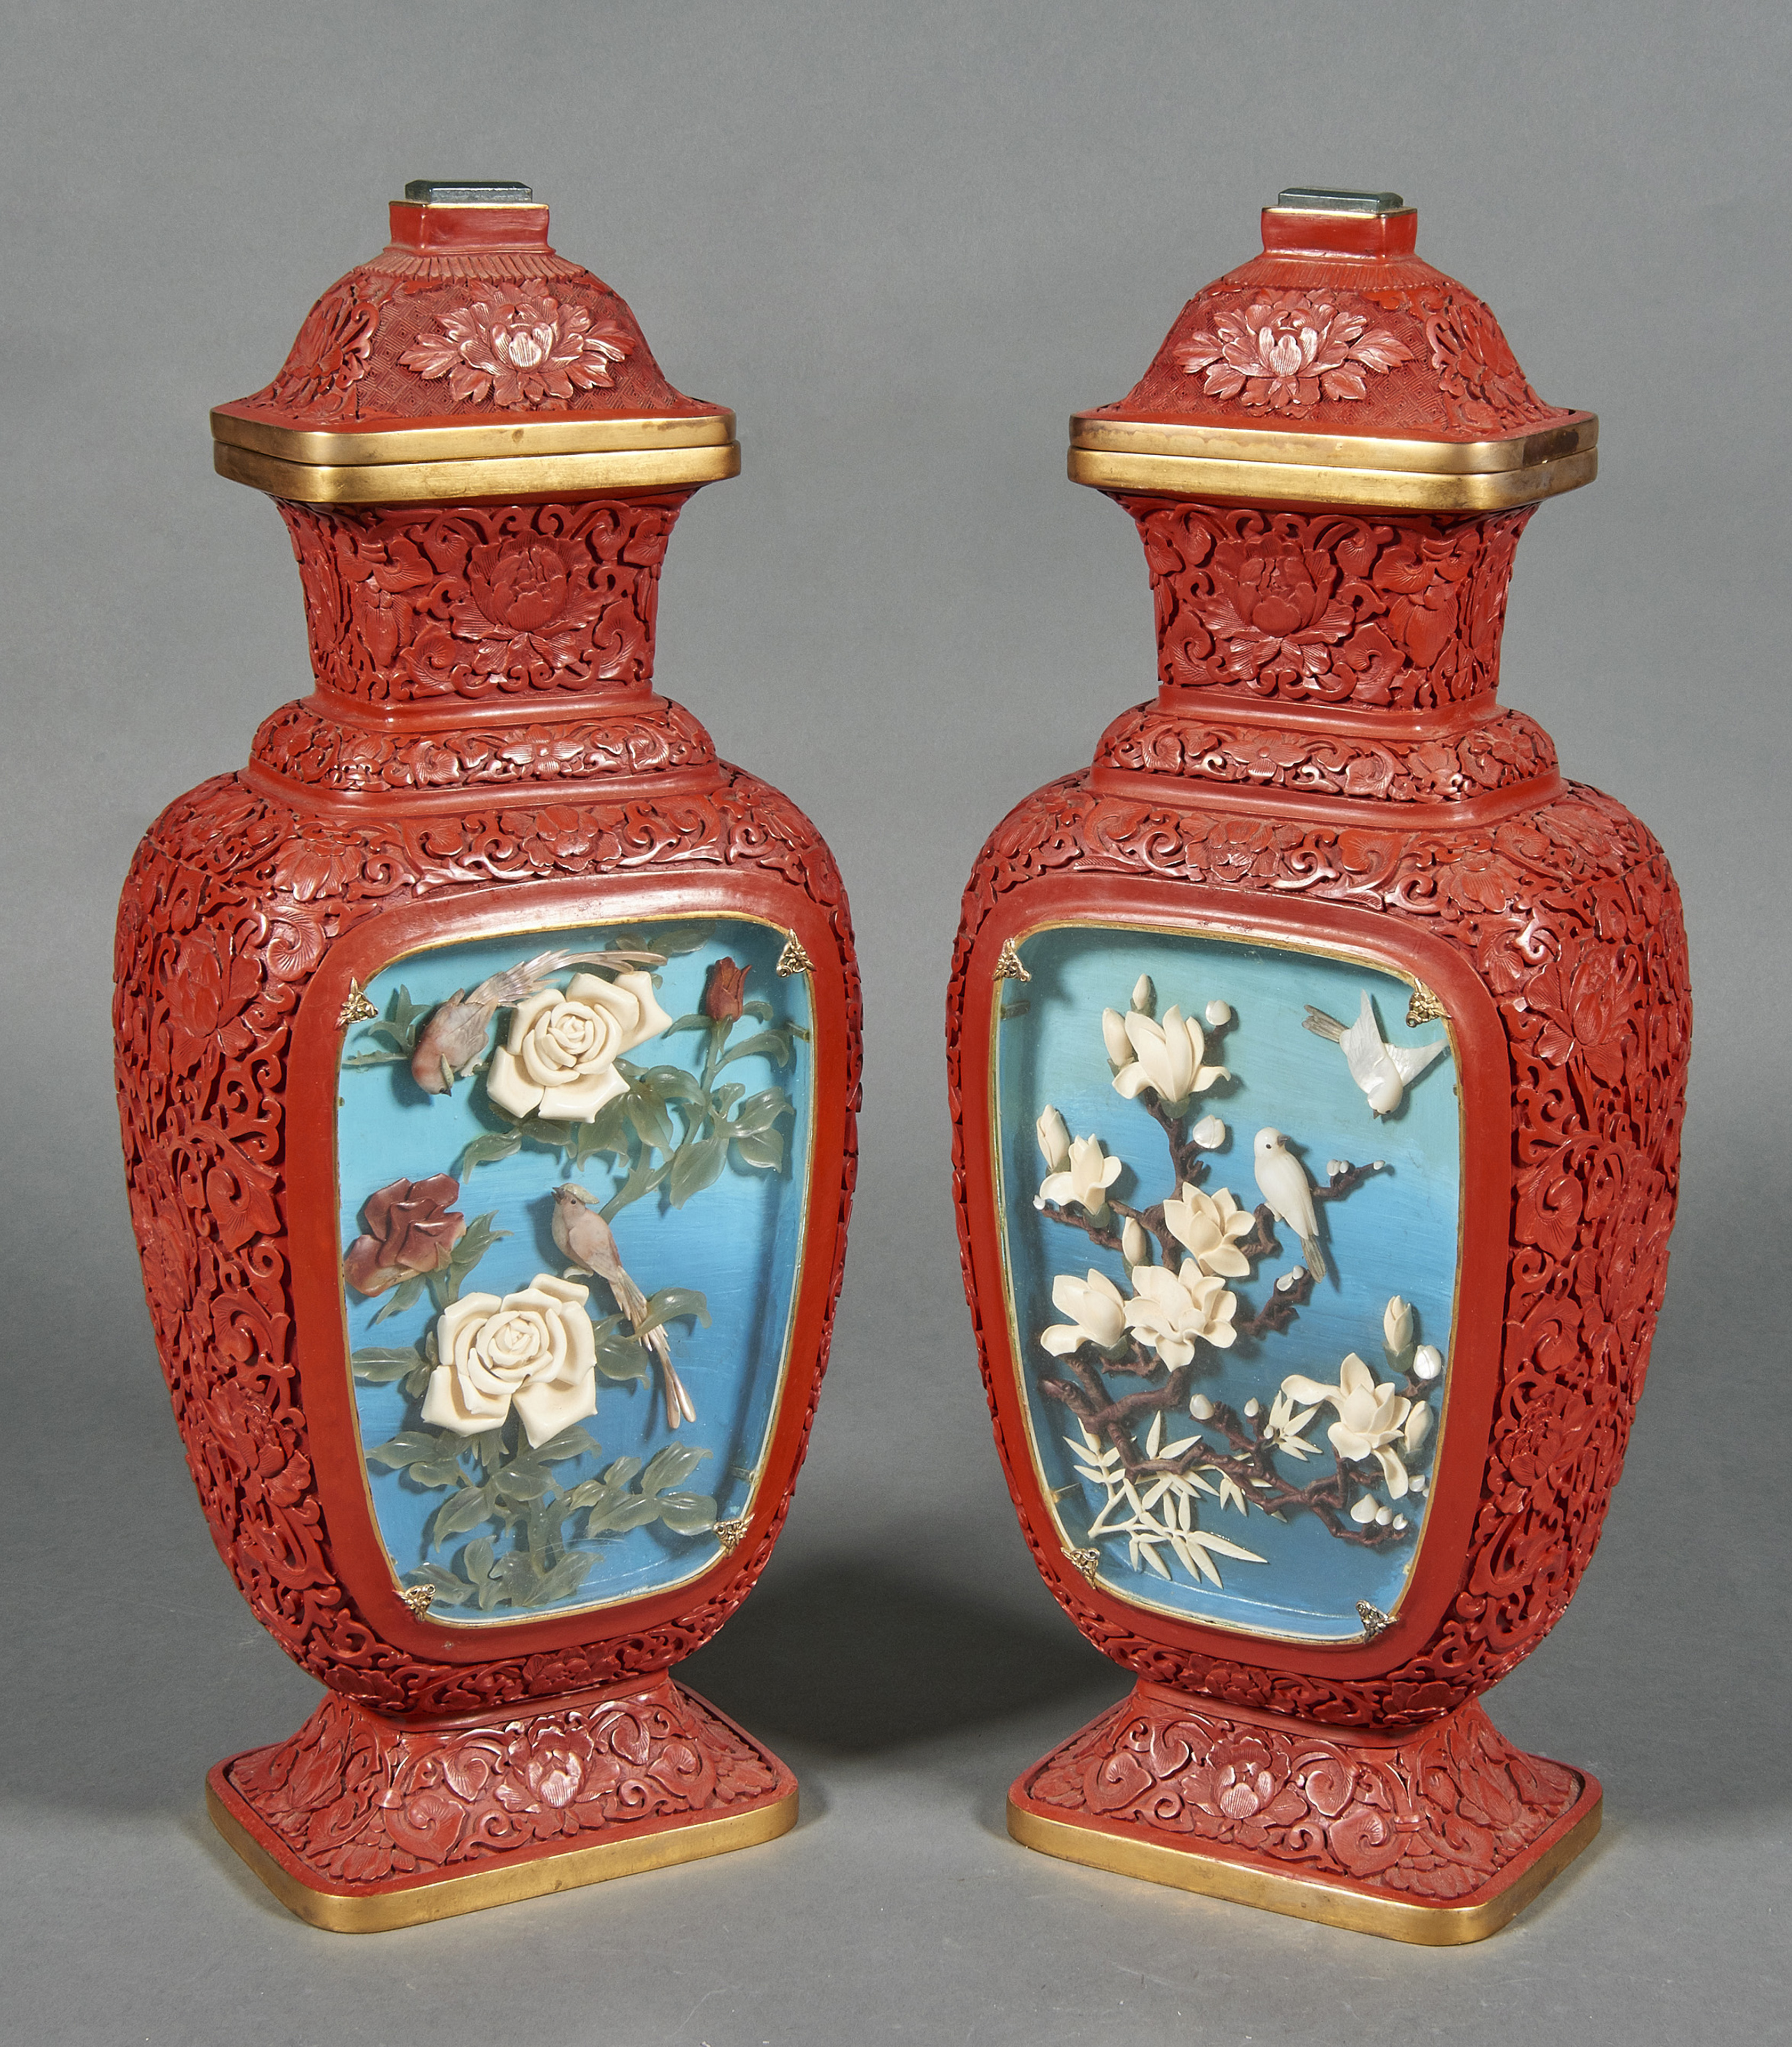 PAIR OF CHINESE CINNABAR LACQUER